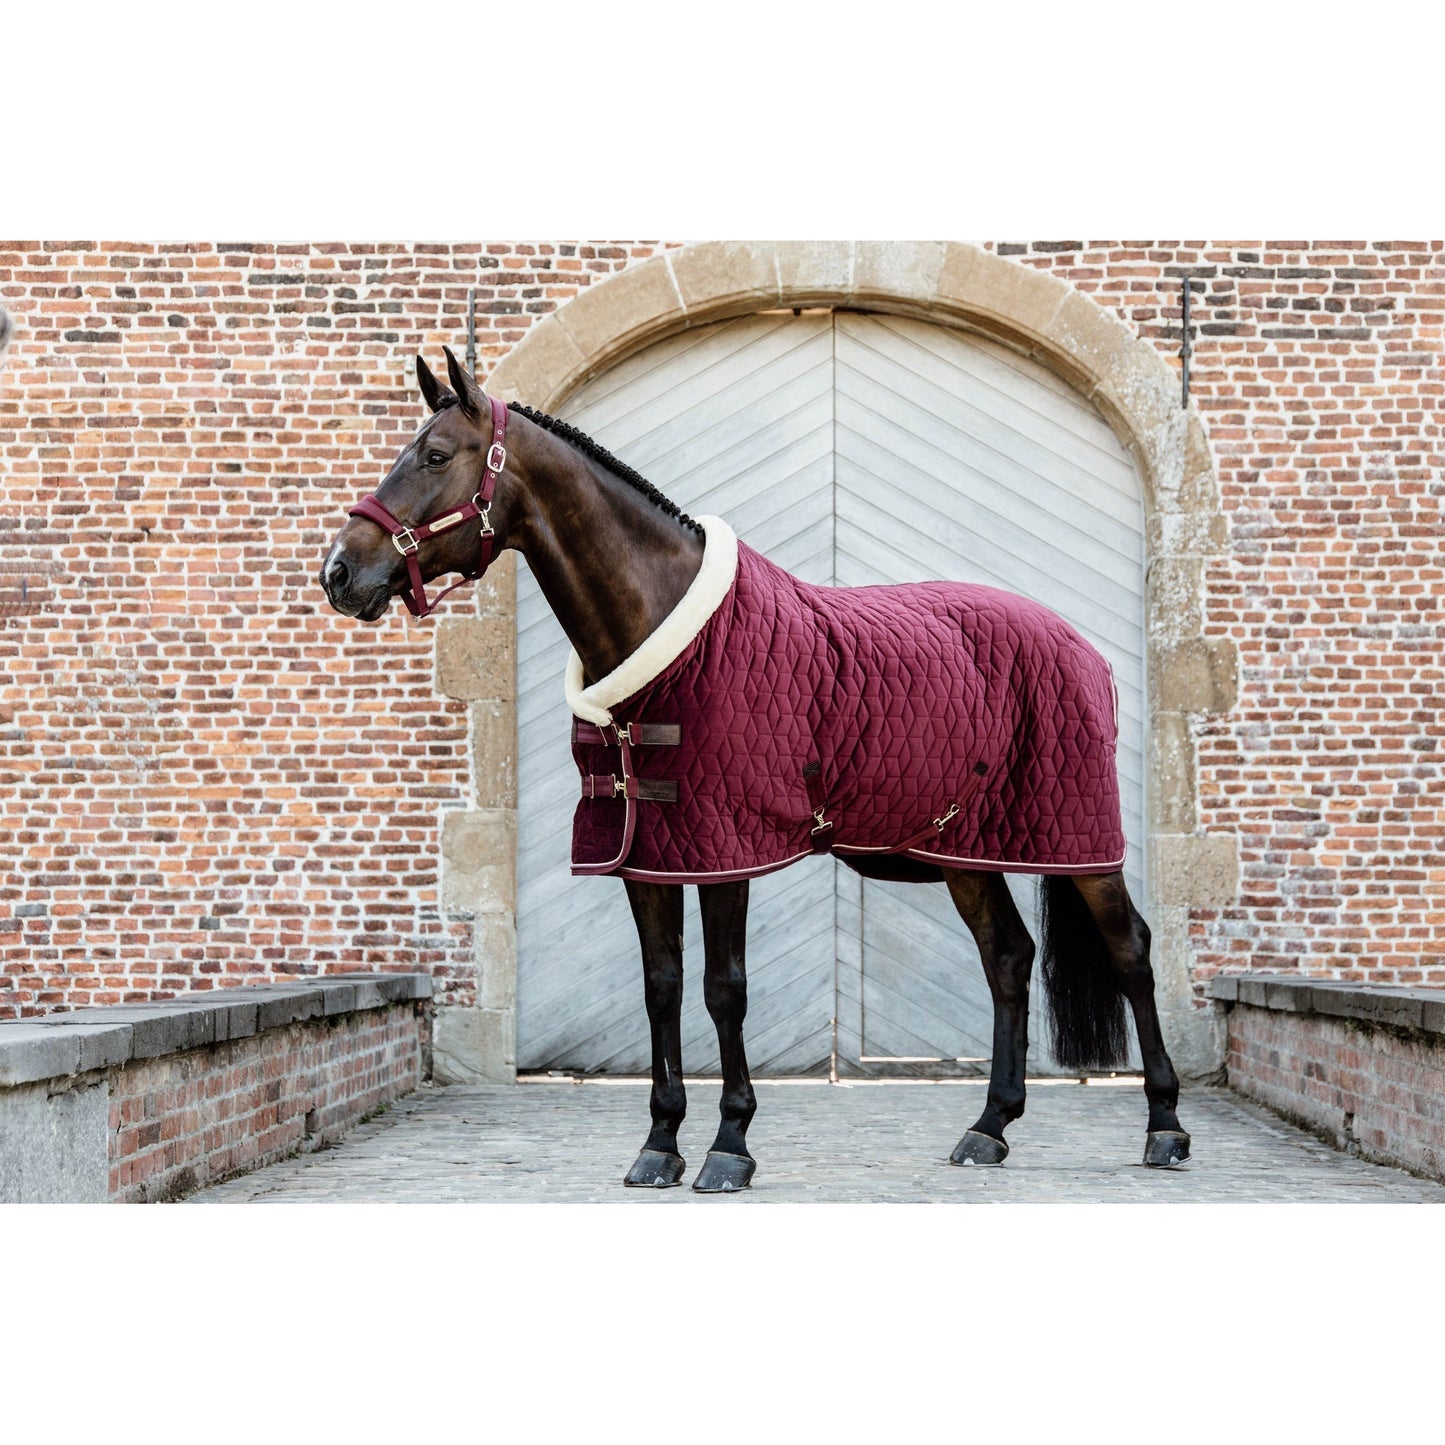 Horse in Kentucky quilted rug, standing before brick wall archway.